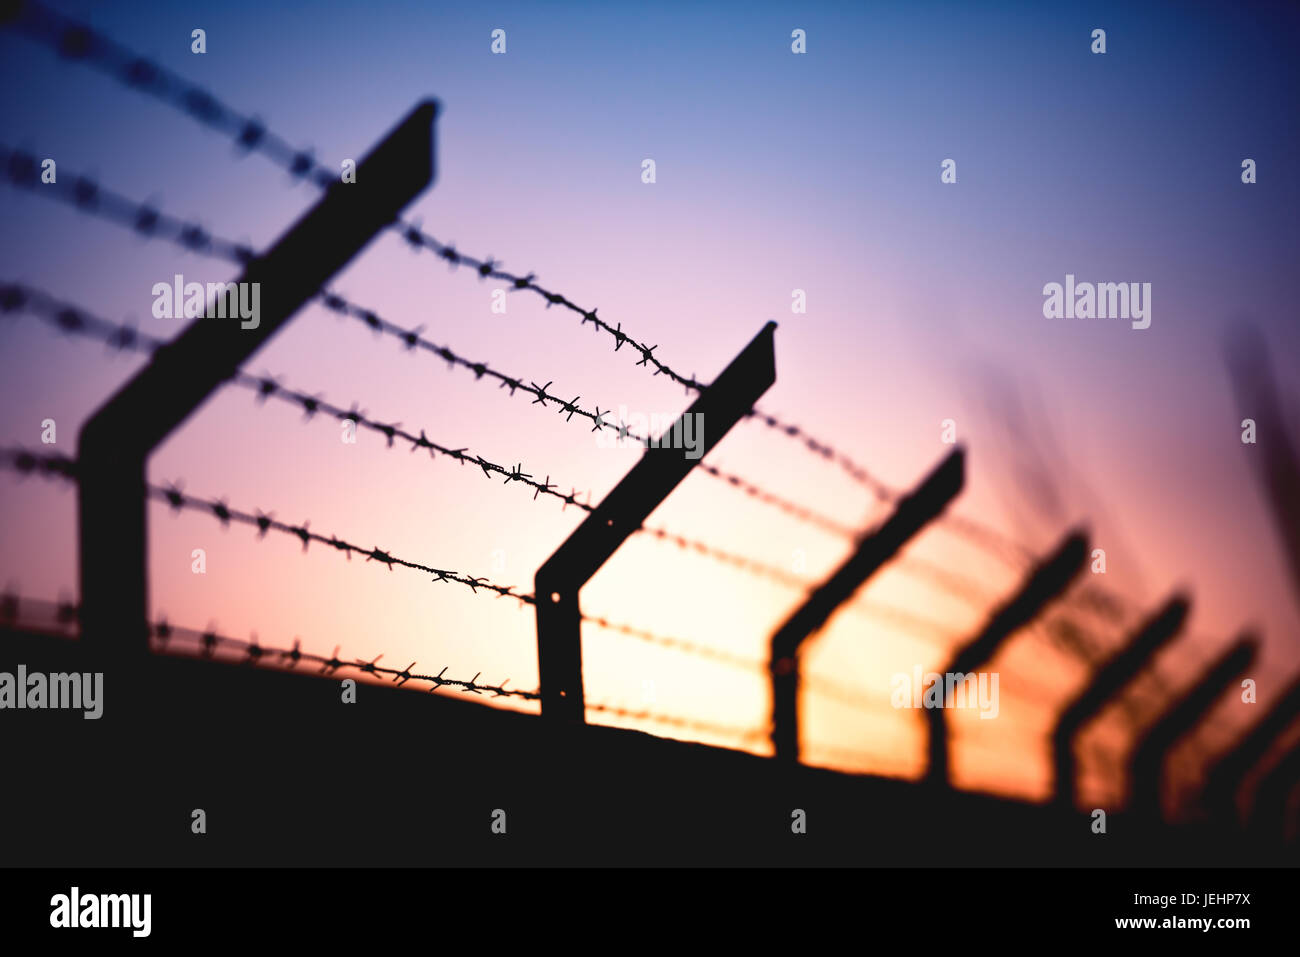 Wall with barbed wire and a sunset in the background. Stock Photo